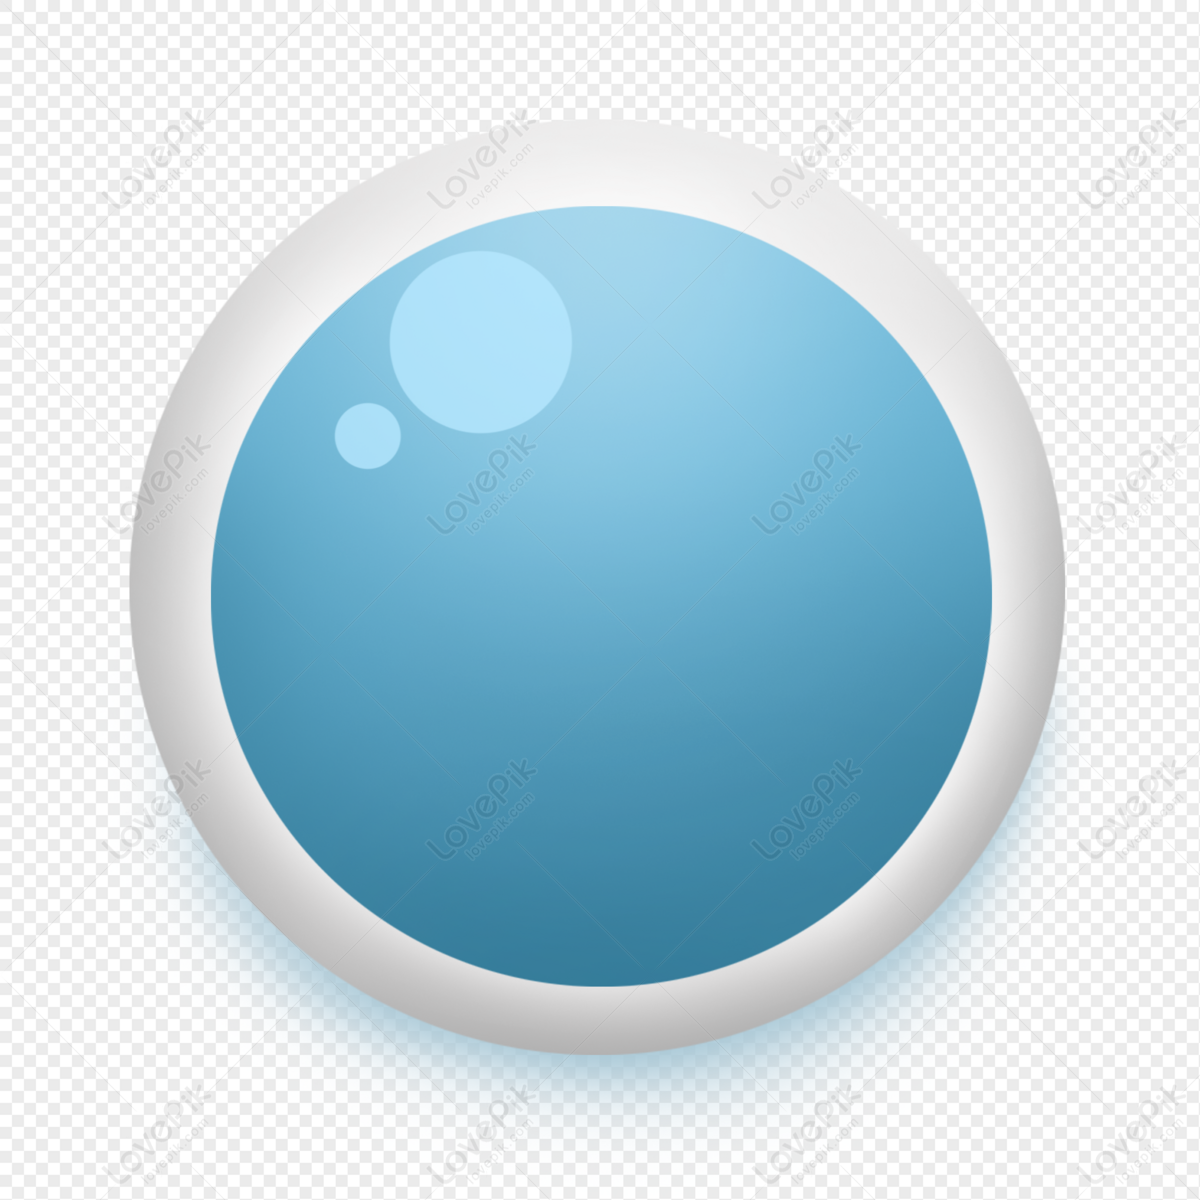 Rounded Button Png